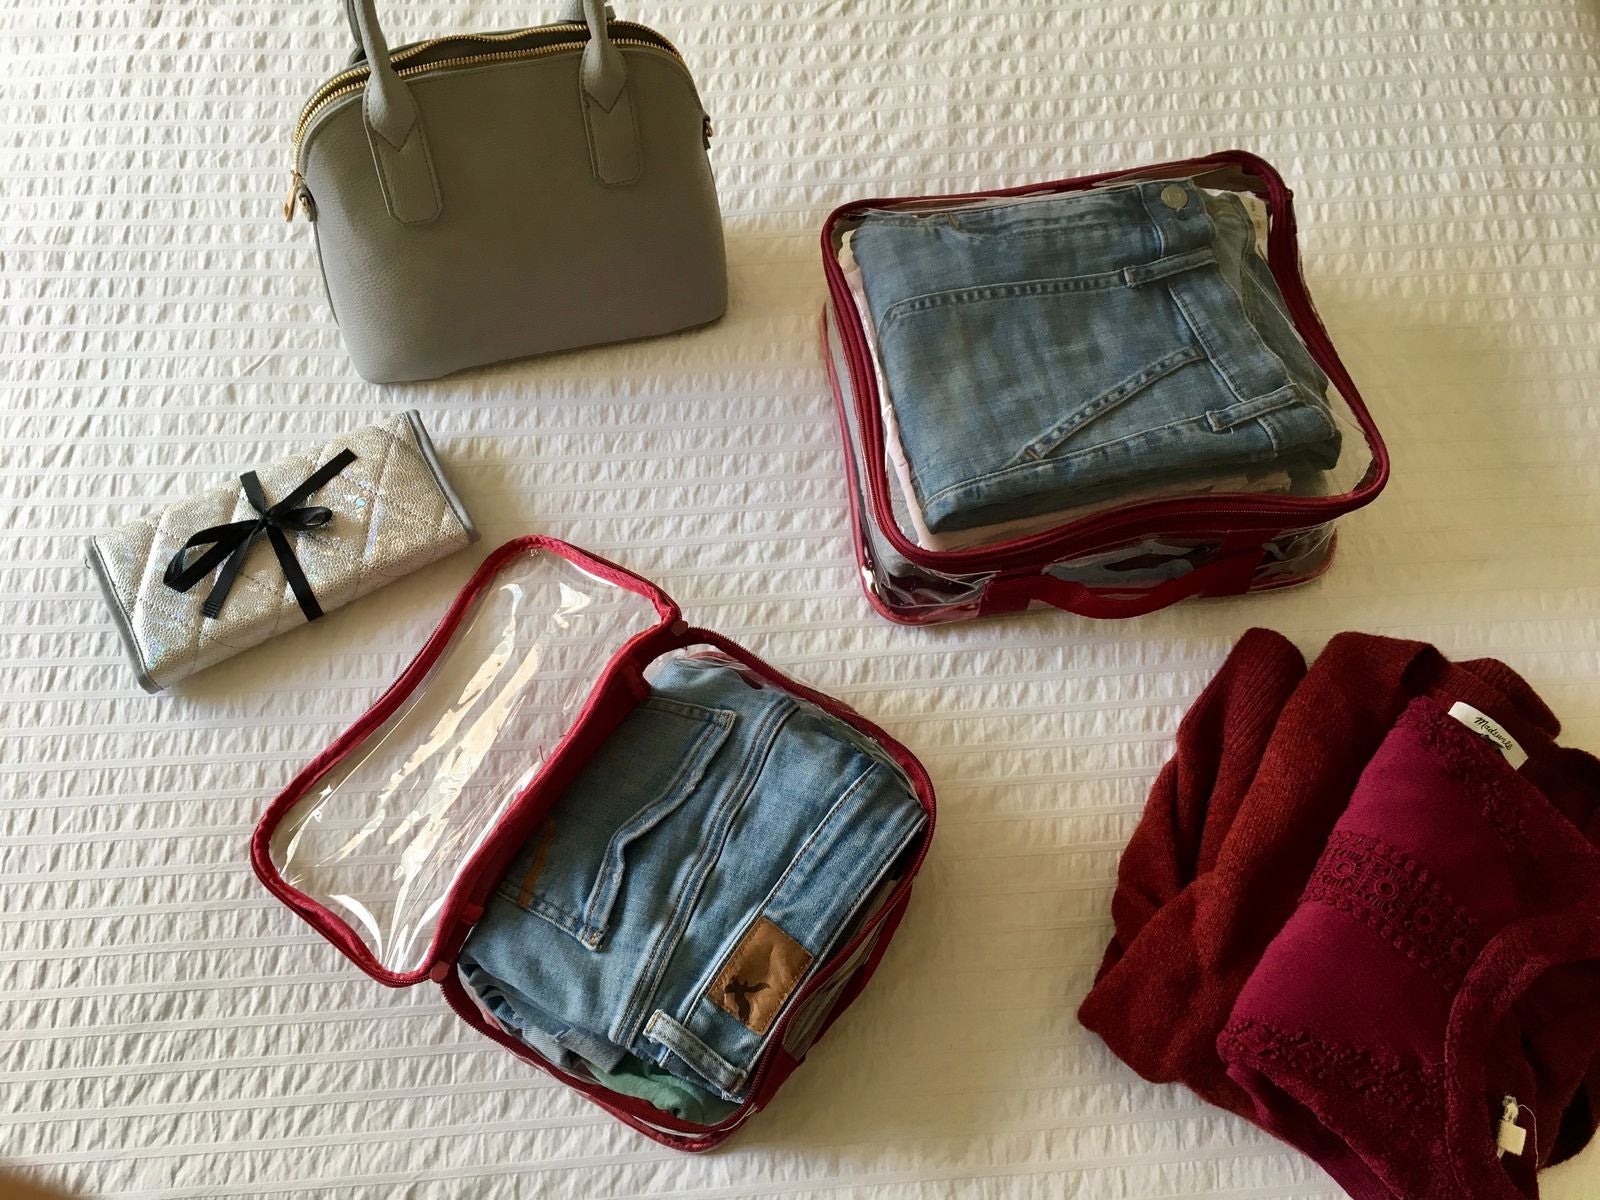 Folded jeans and shirts packed in clear packing cubes